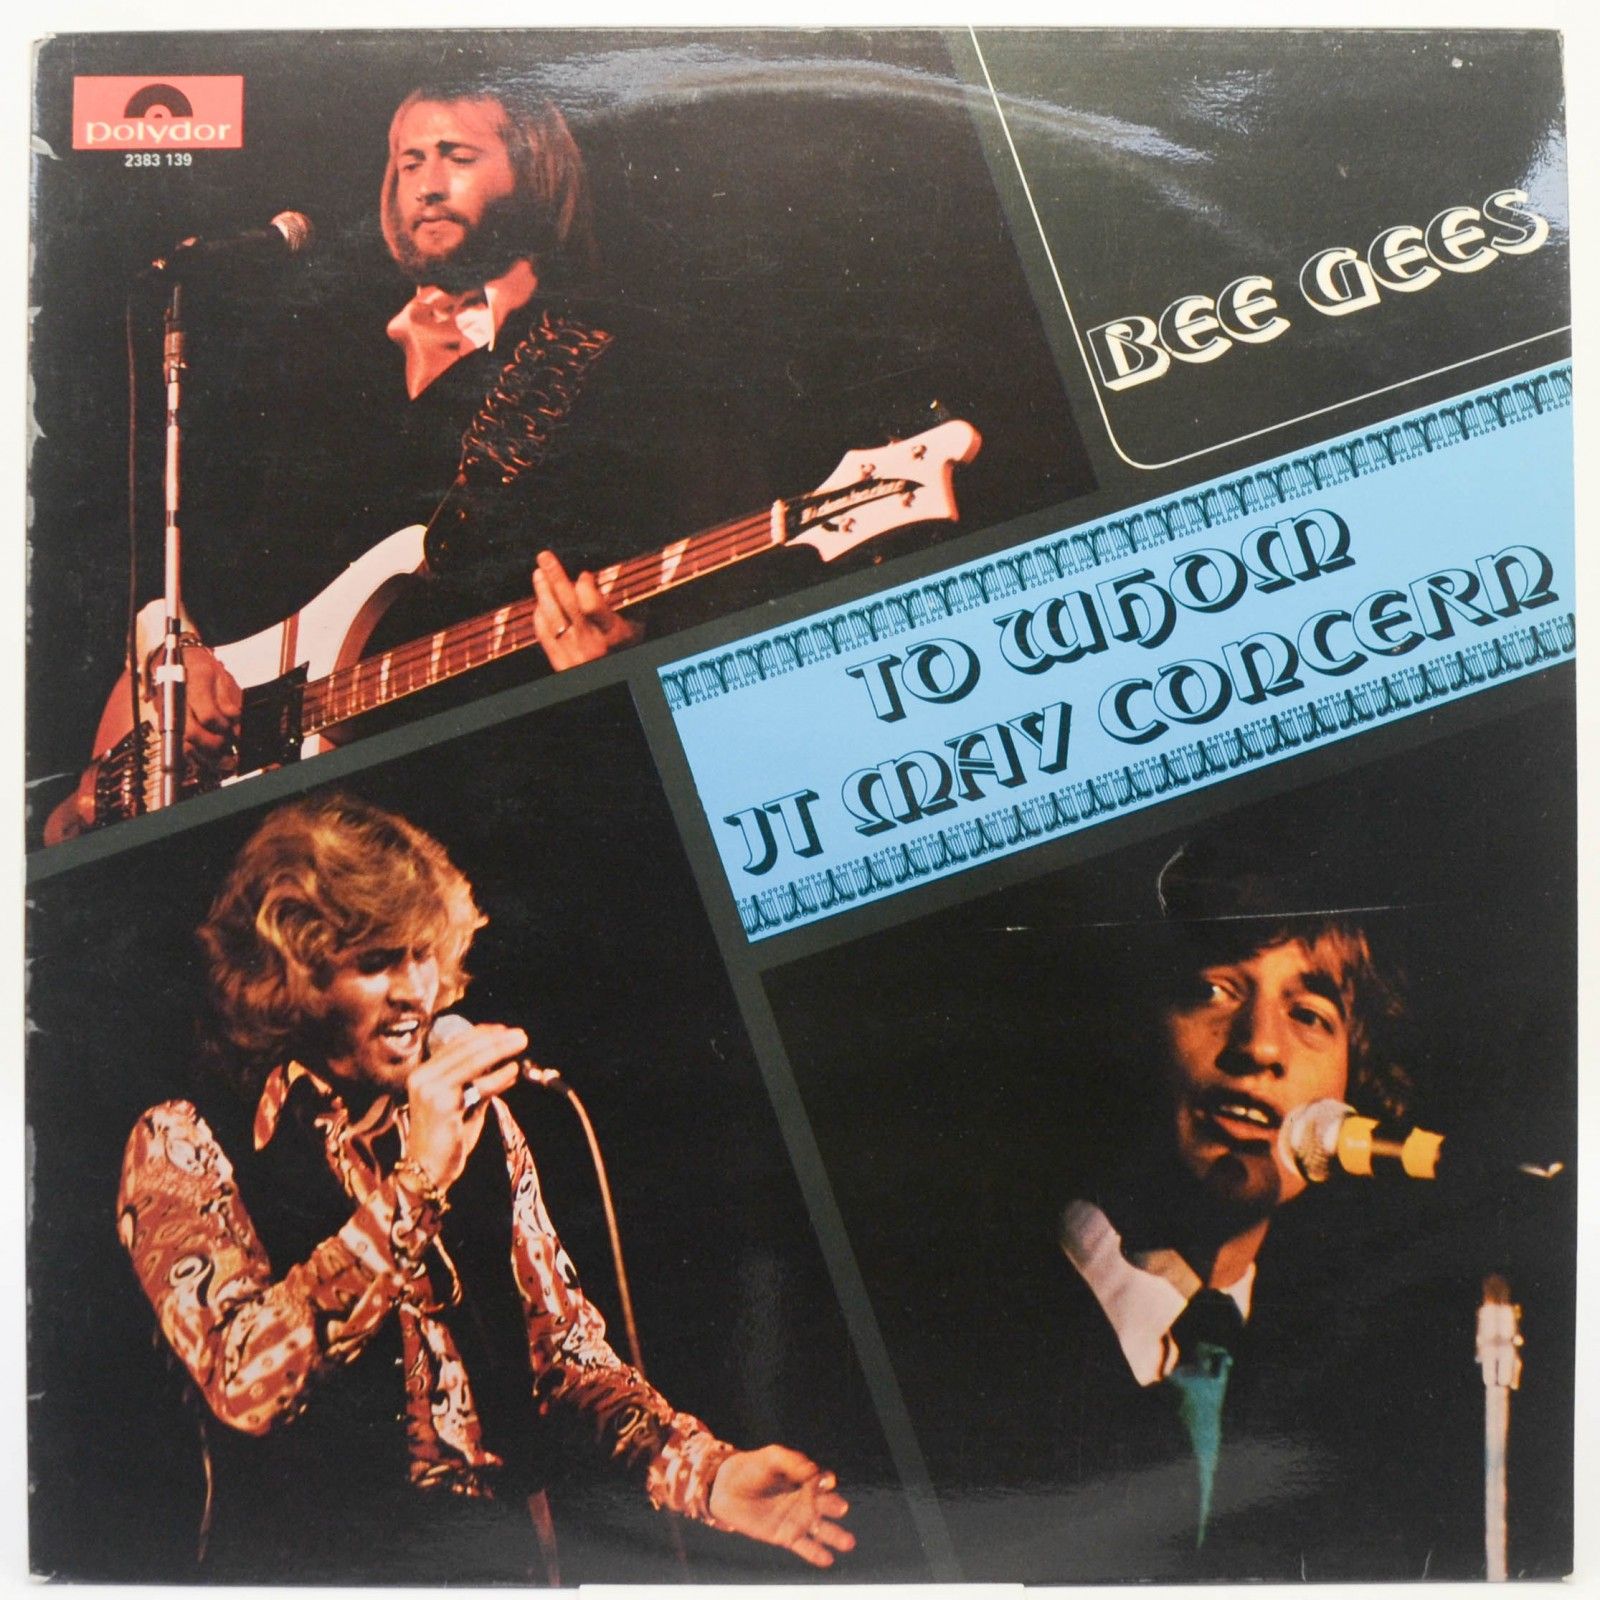 Bee Gees — To Whom It May Concern, 1972